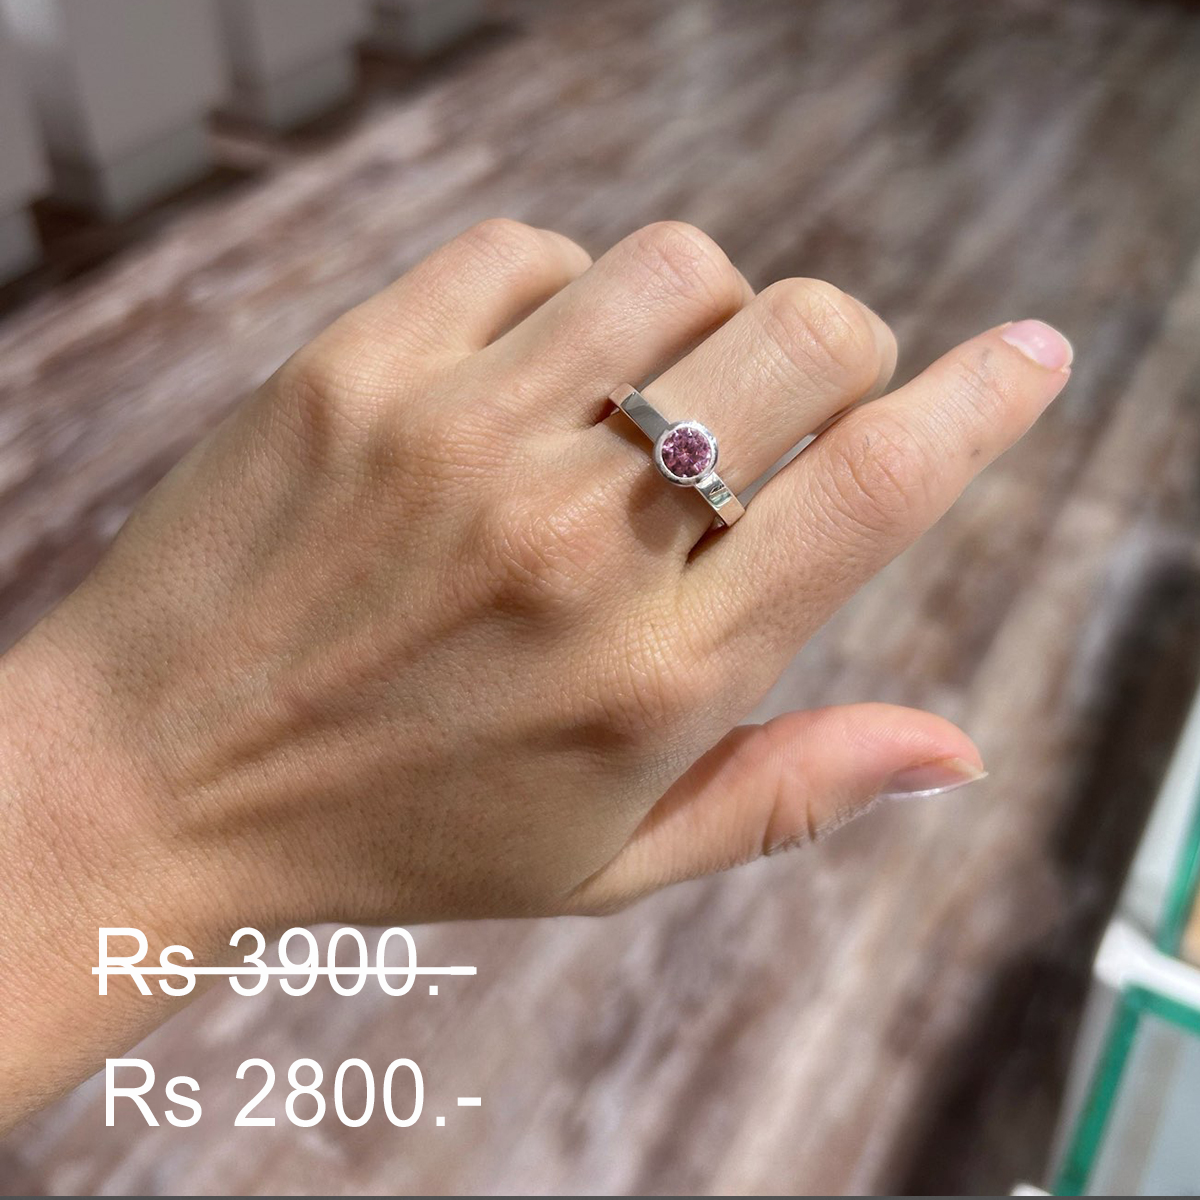 Discounted pink zirconia ring